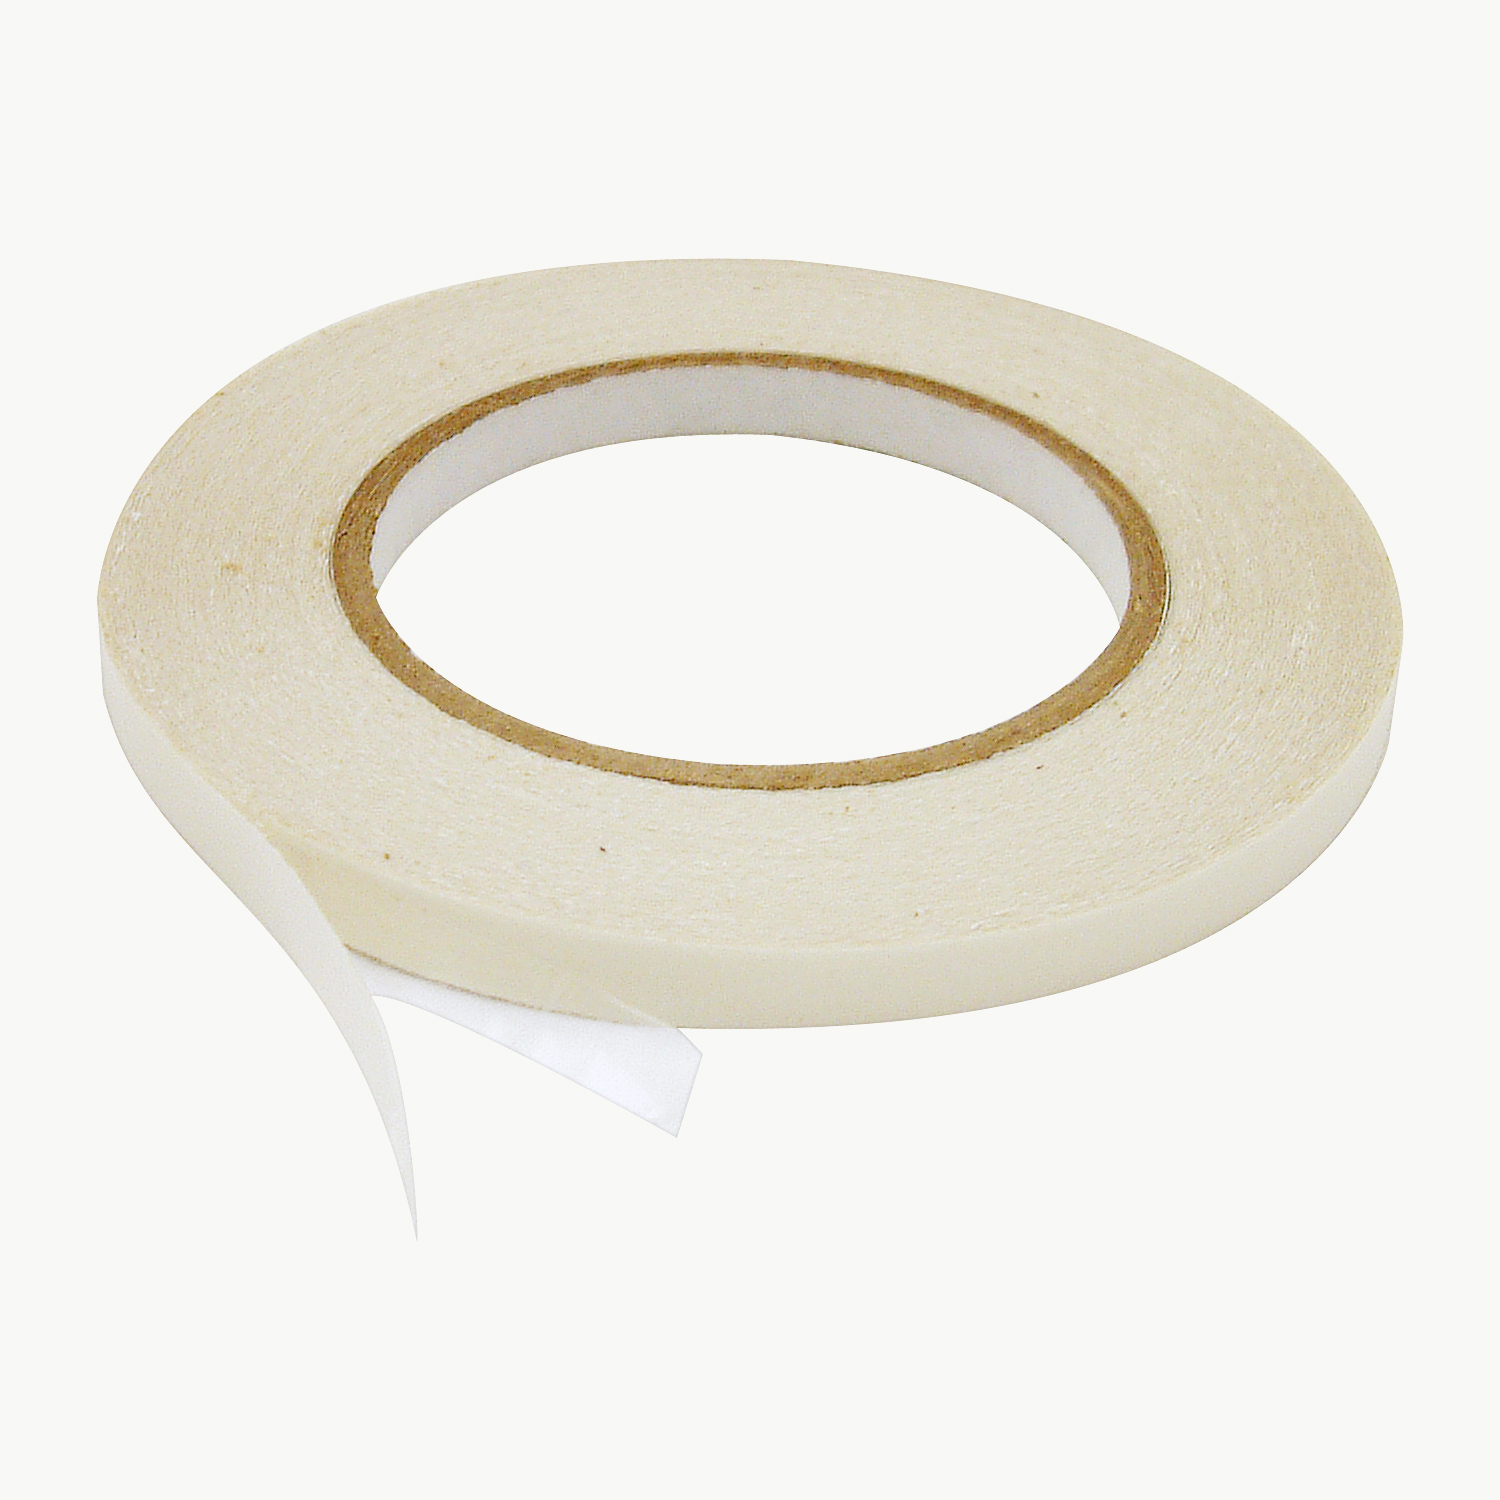 JVCC DC-4199CS Double-Sided Film Tape [Acrylic Adhesive]